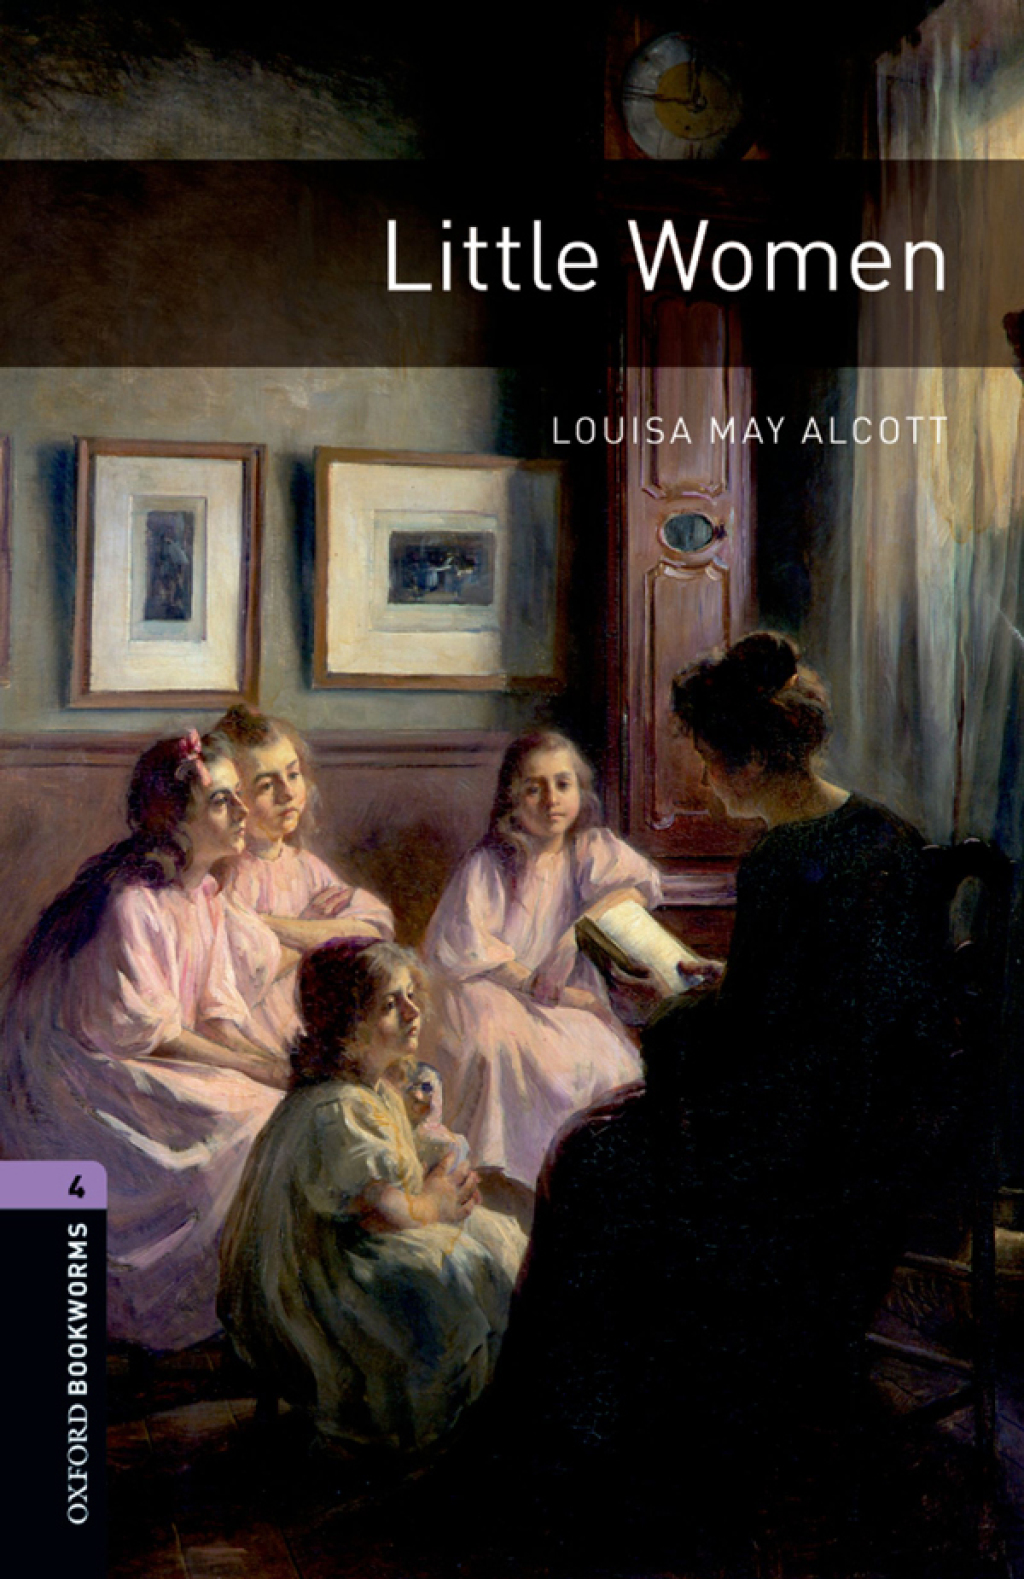 Little Women Level 4 Oxford Bookworms Library - 3rd Edition (eBook Rental)